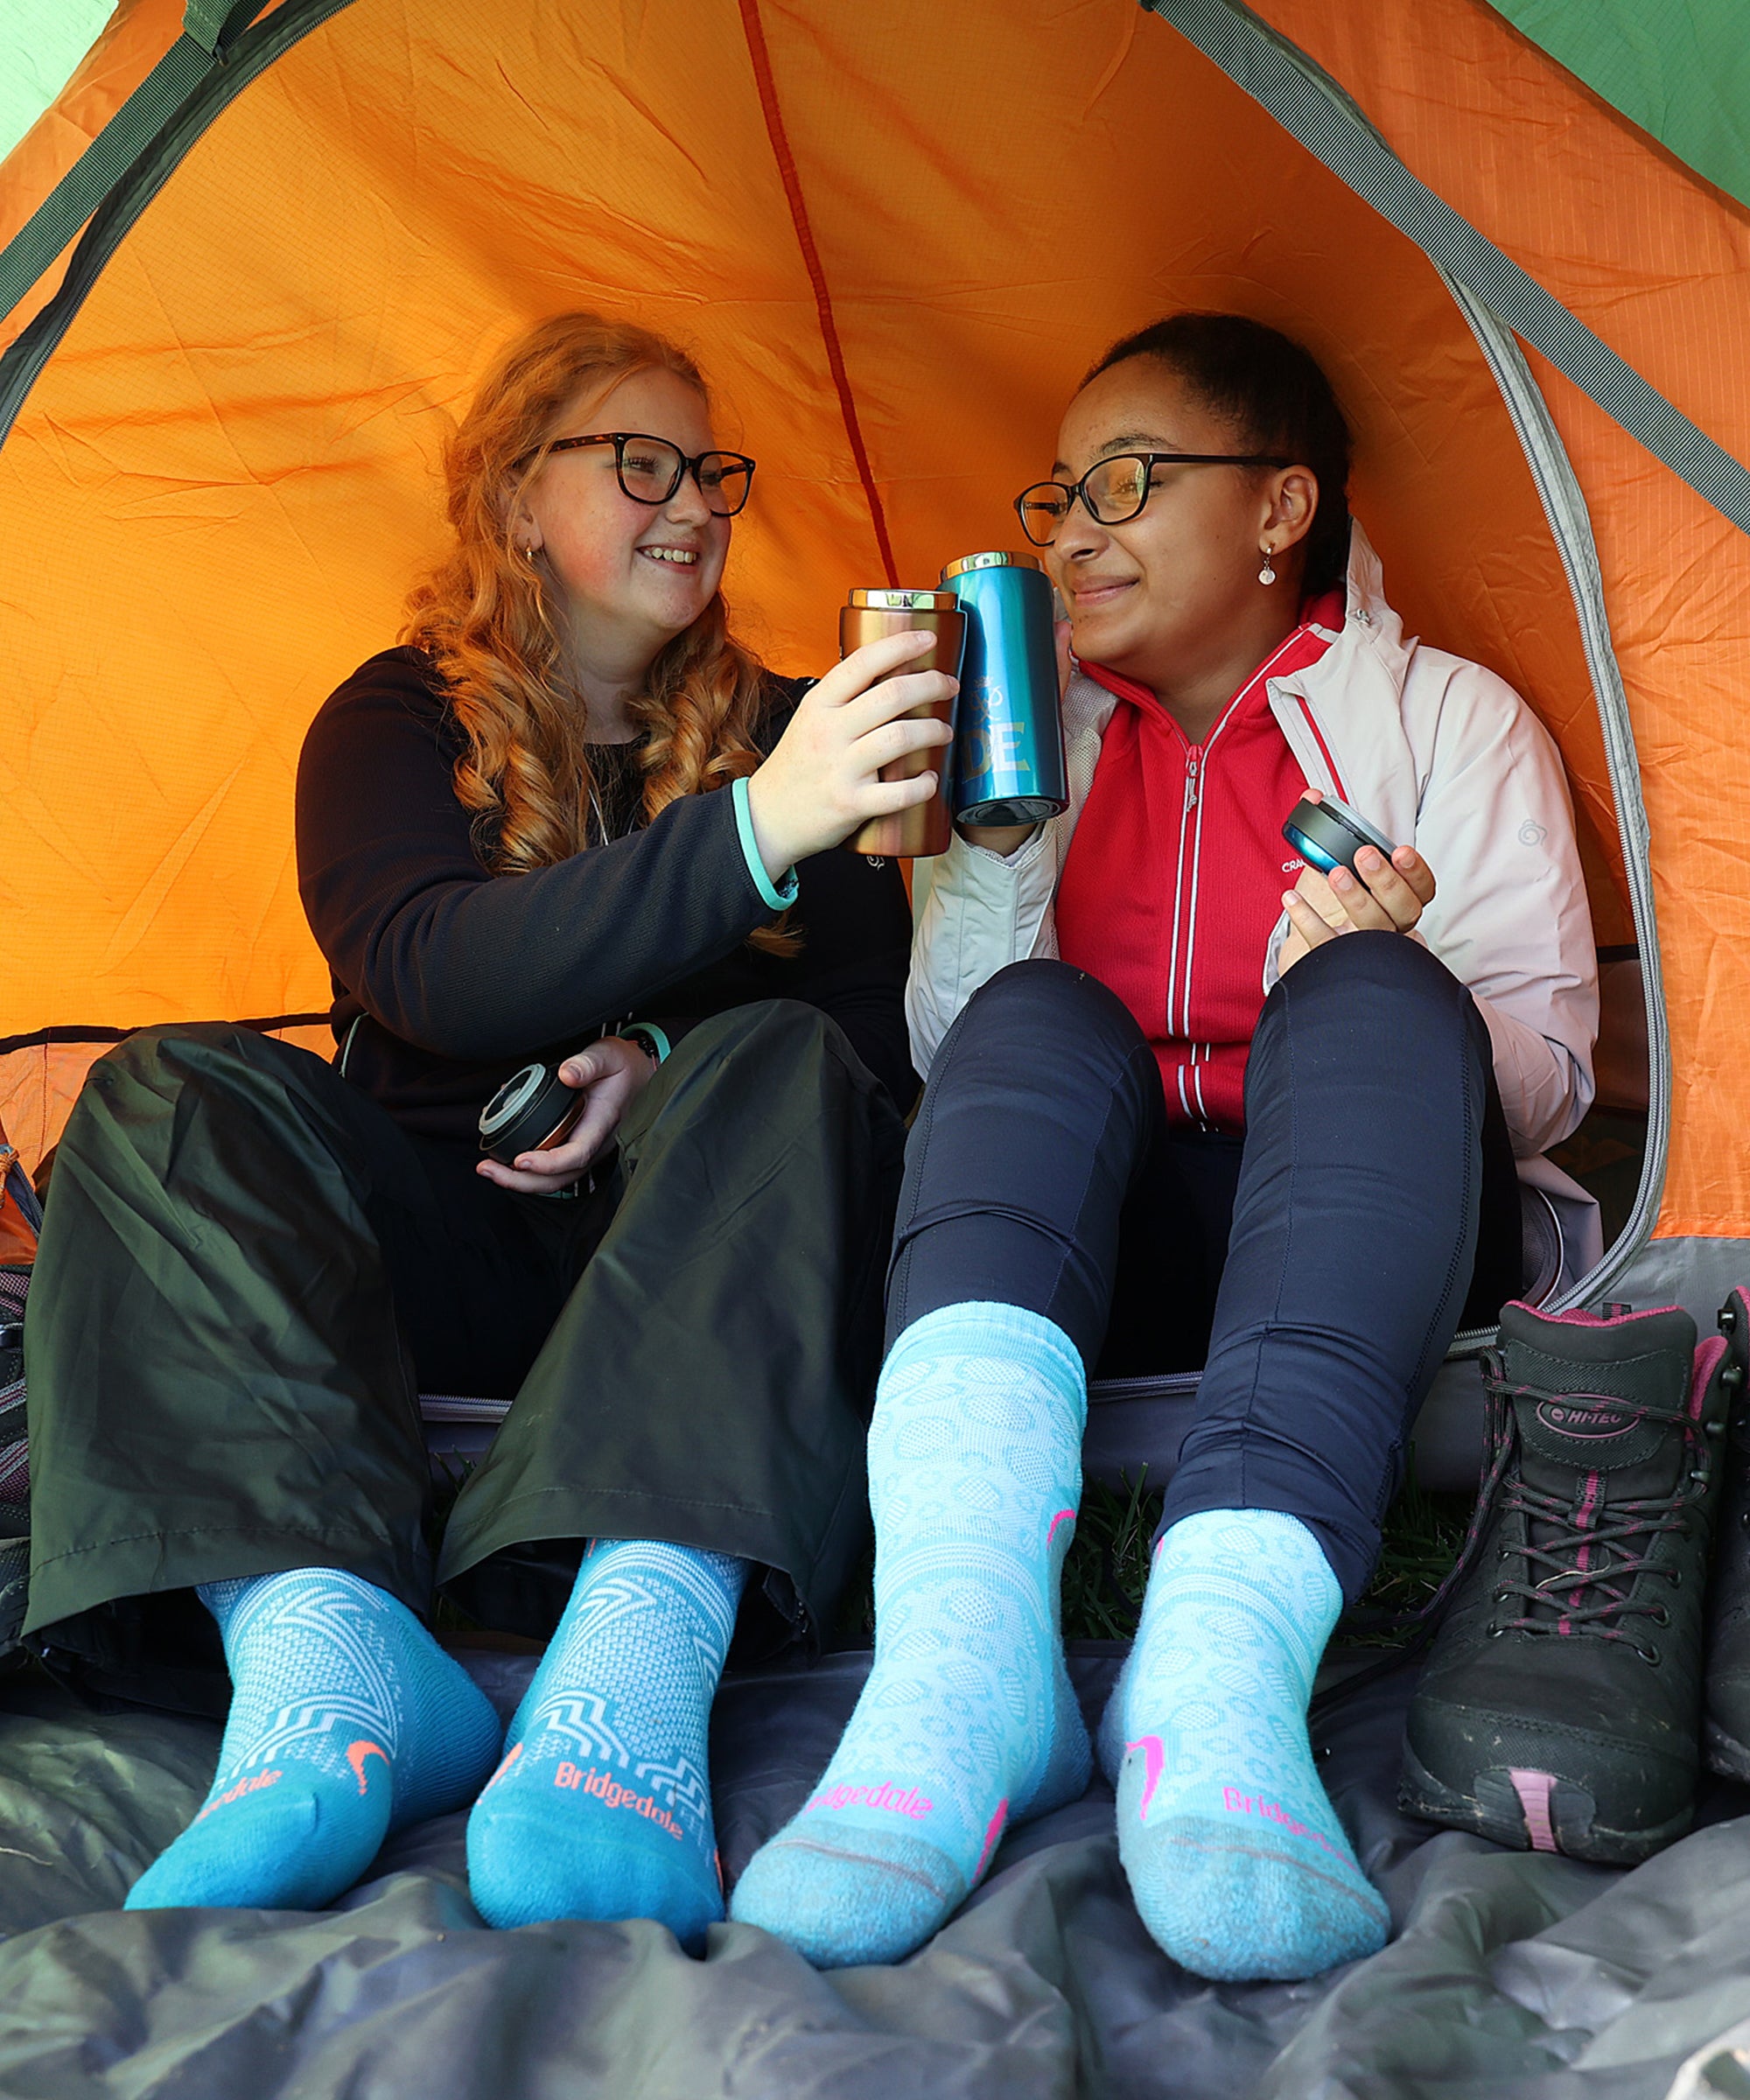 Two girls enjoying hot drinks in a tent